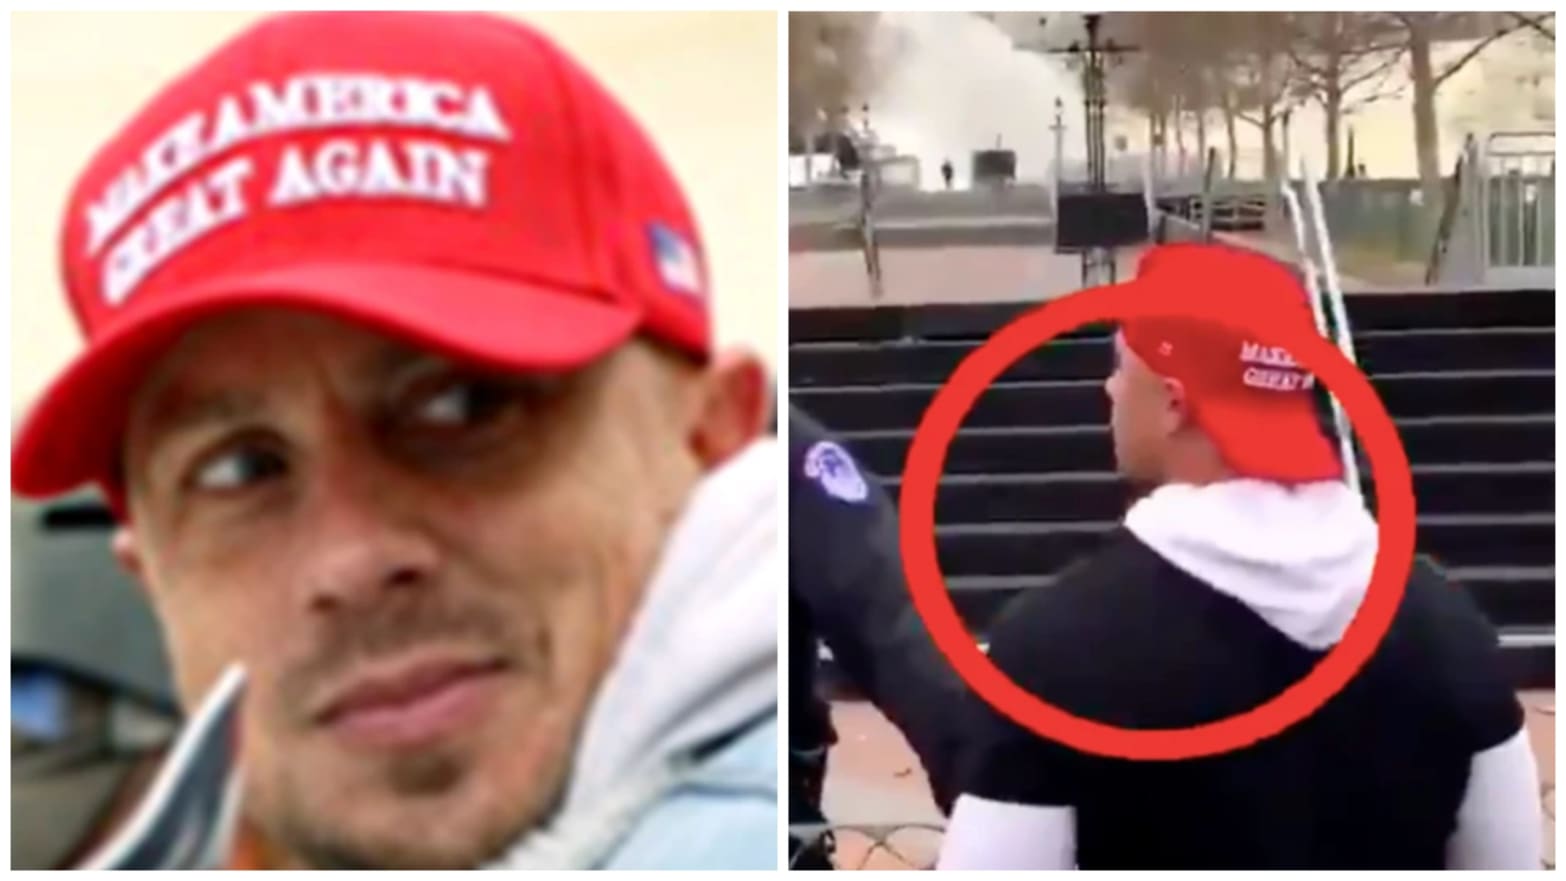 Side-by-side photos of Ryan Samsel during the Jan. 6 attack at the U.S. Capitol.